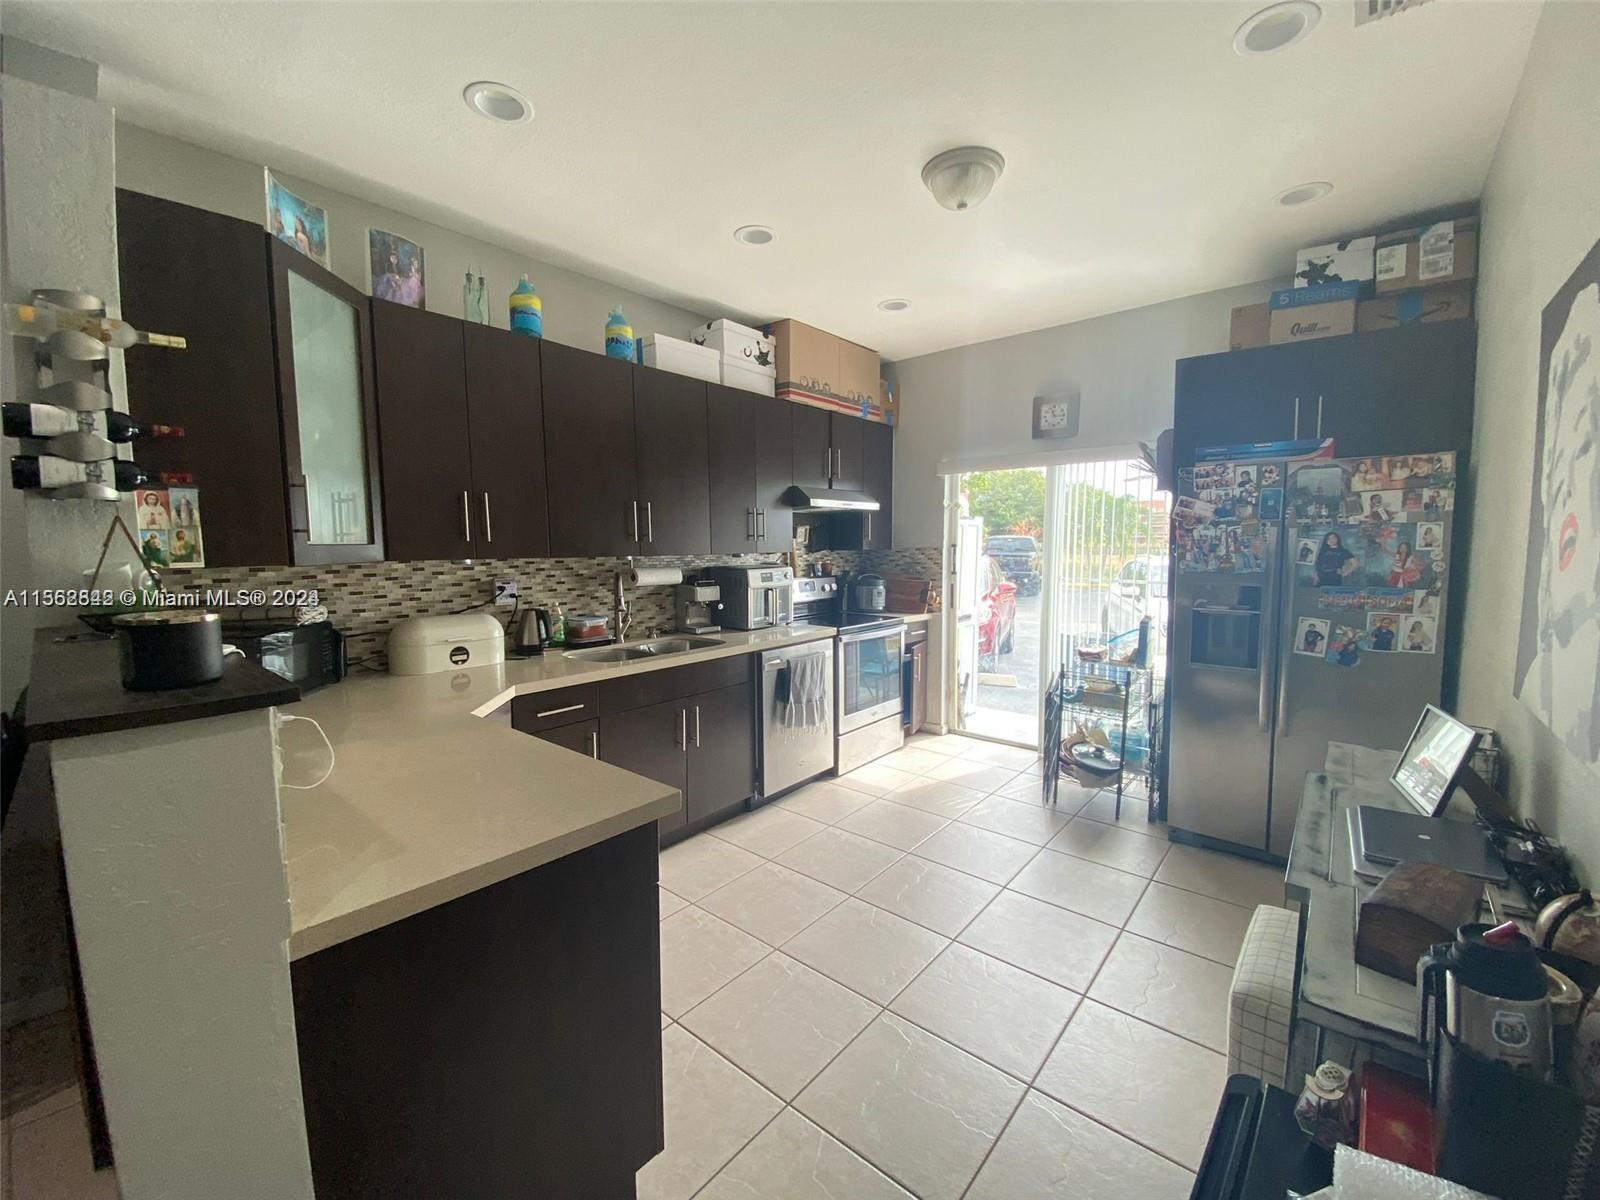 Photo of 6922 NW 179th St #106-5 in Hialeah, FL